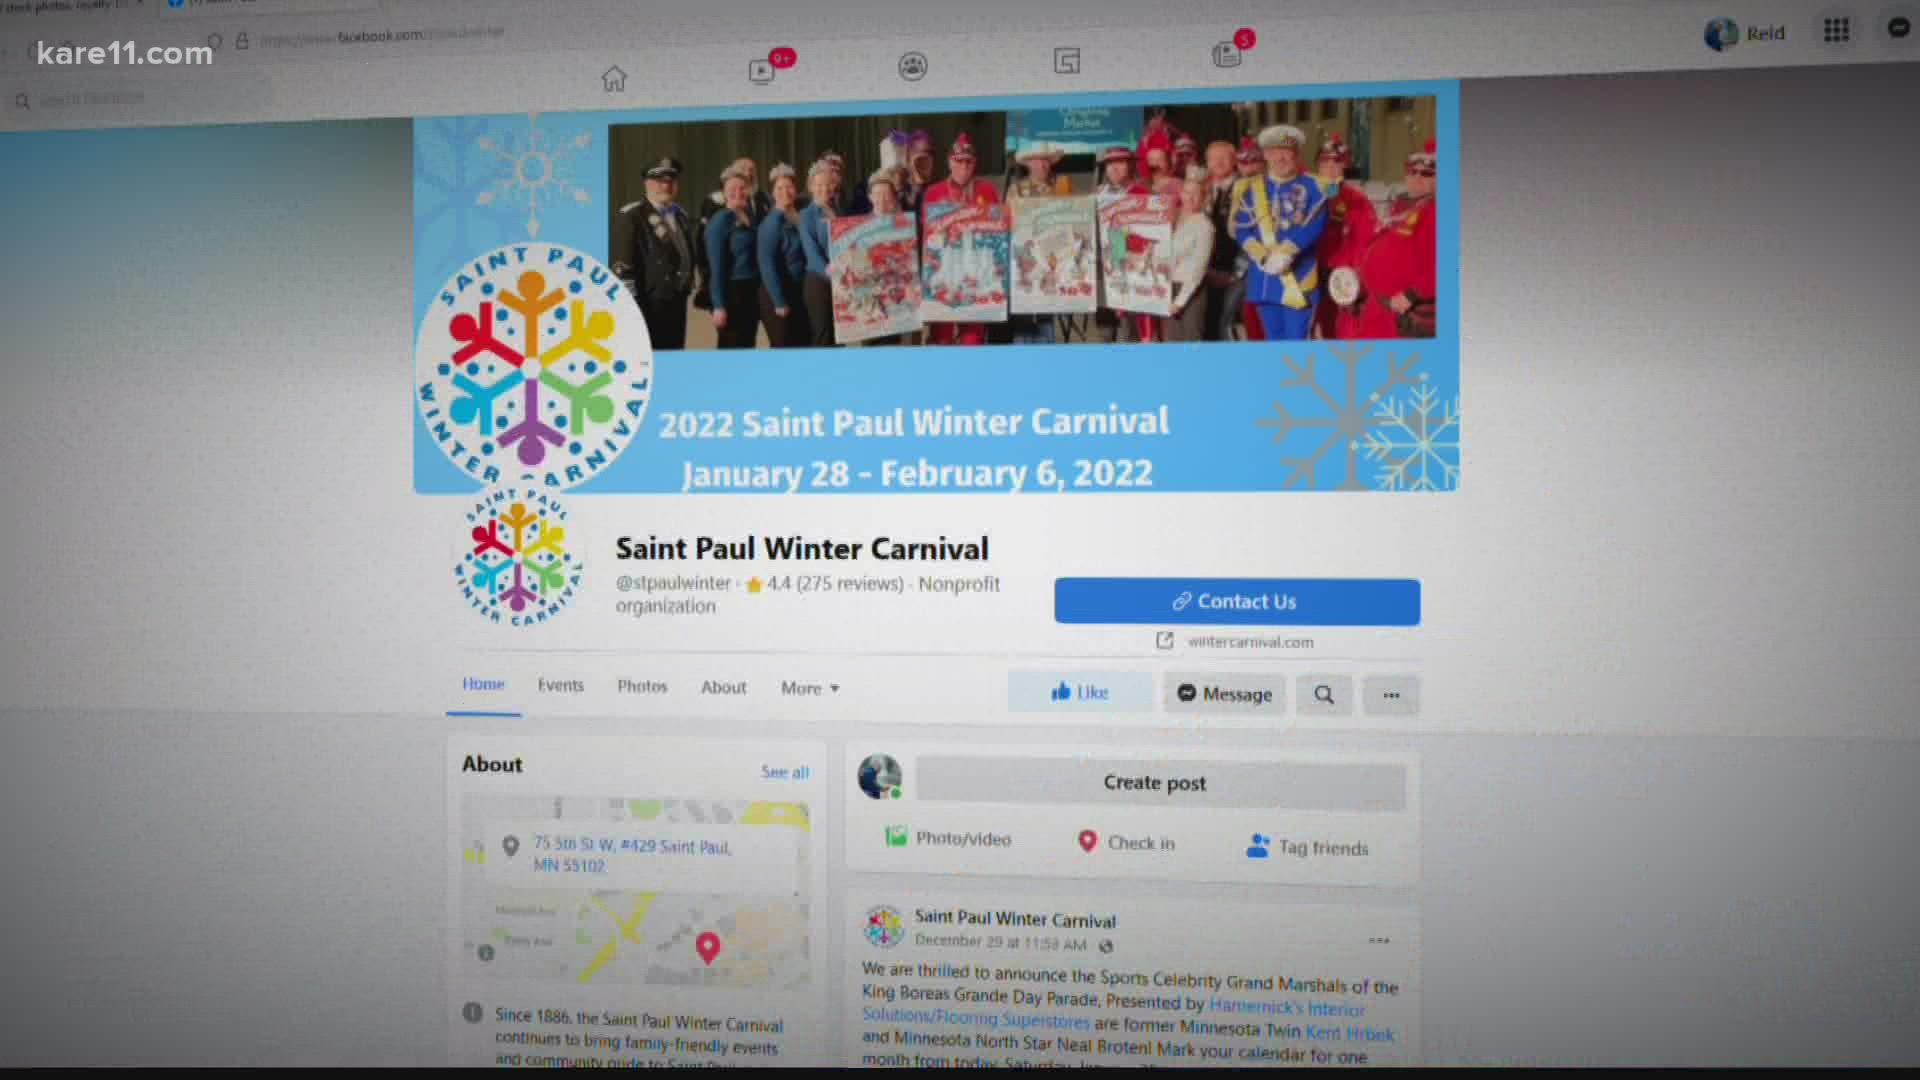 The organizers of your favorite winter carnival created a special competition and fundraiser that's a cut above the rest.